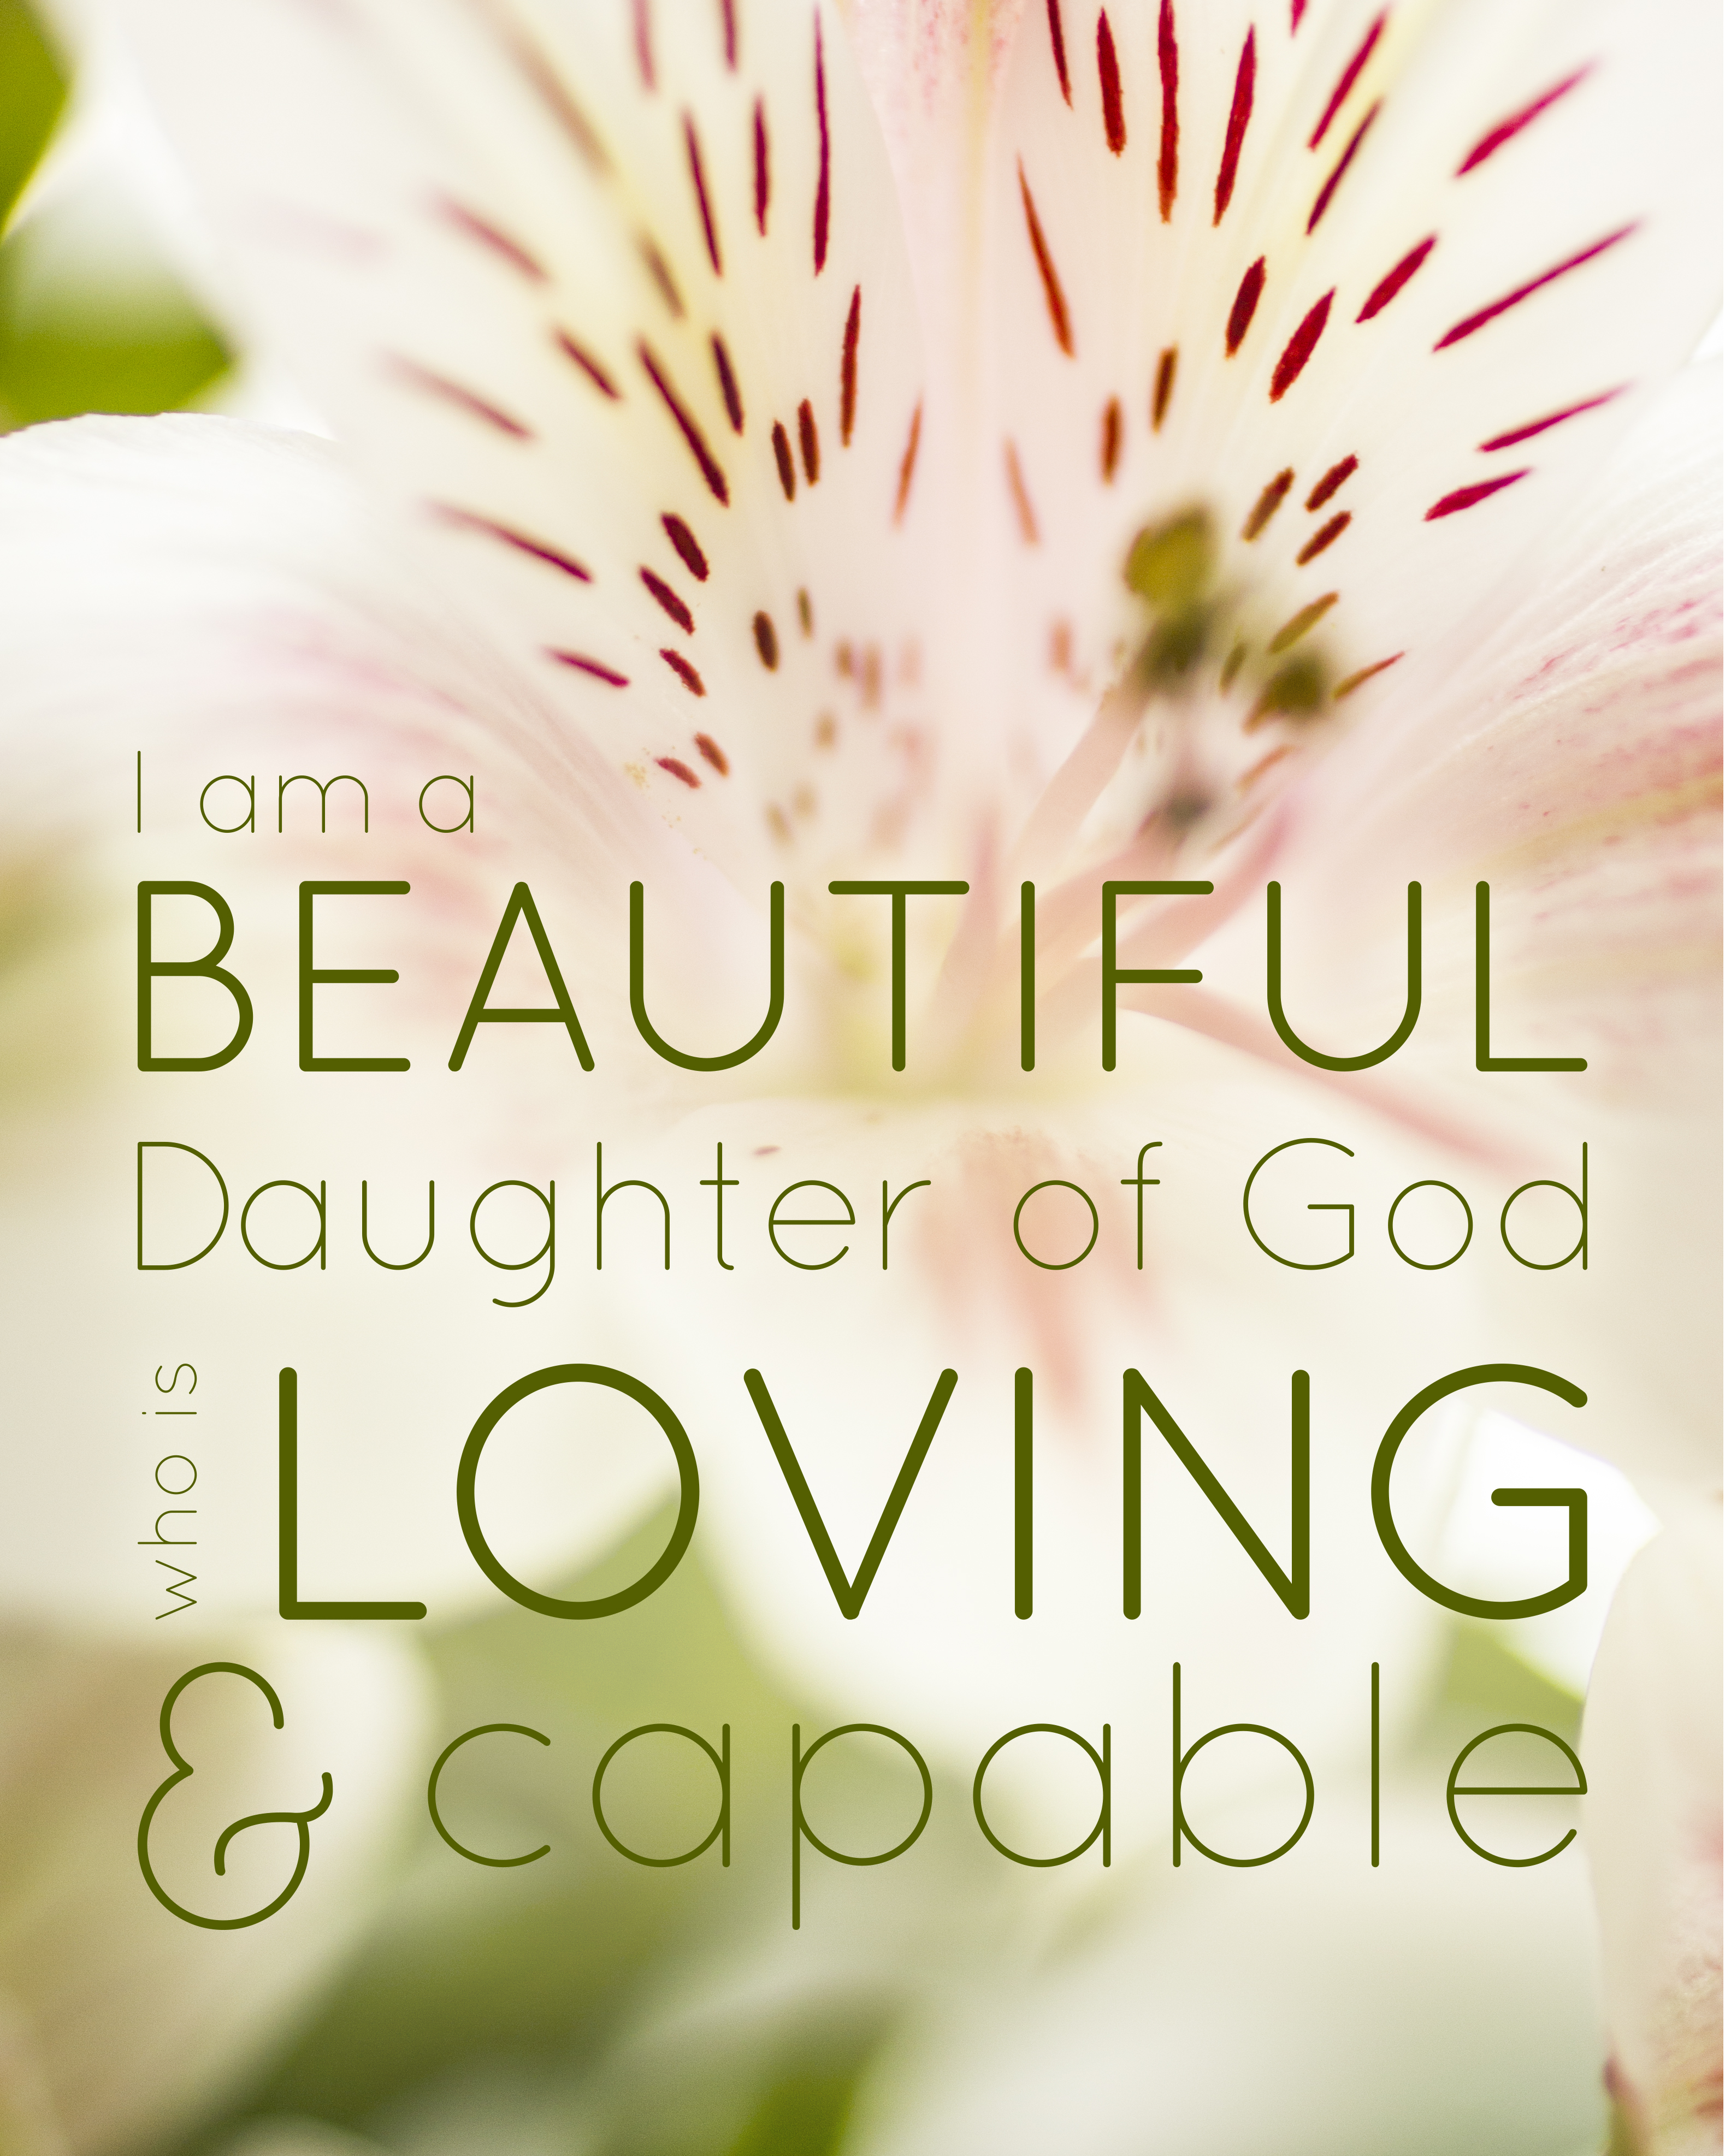 I am a Beautiful Daughter of God -- Free Printable!